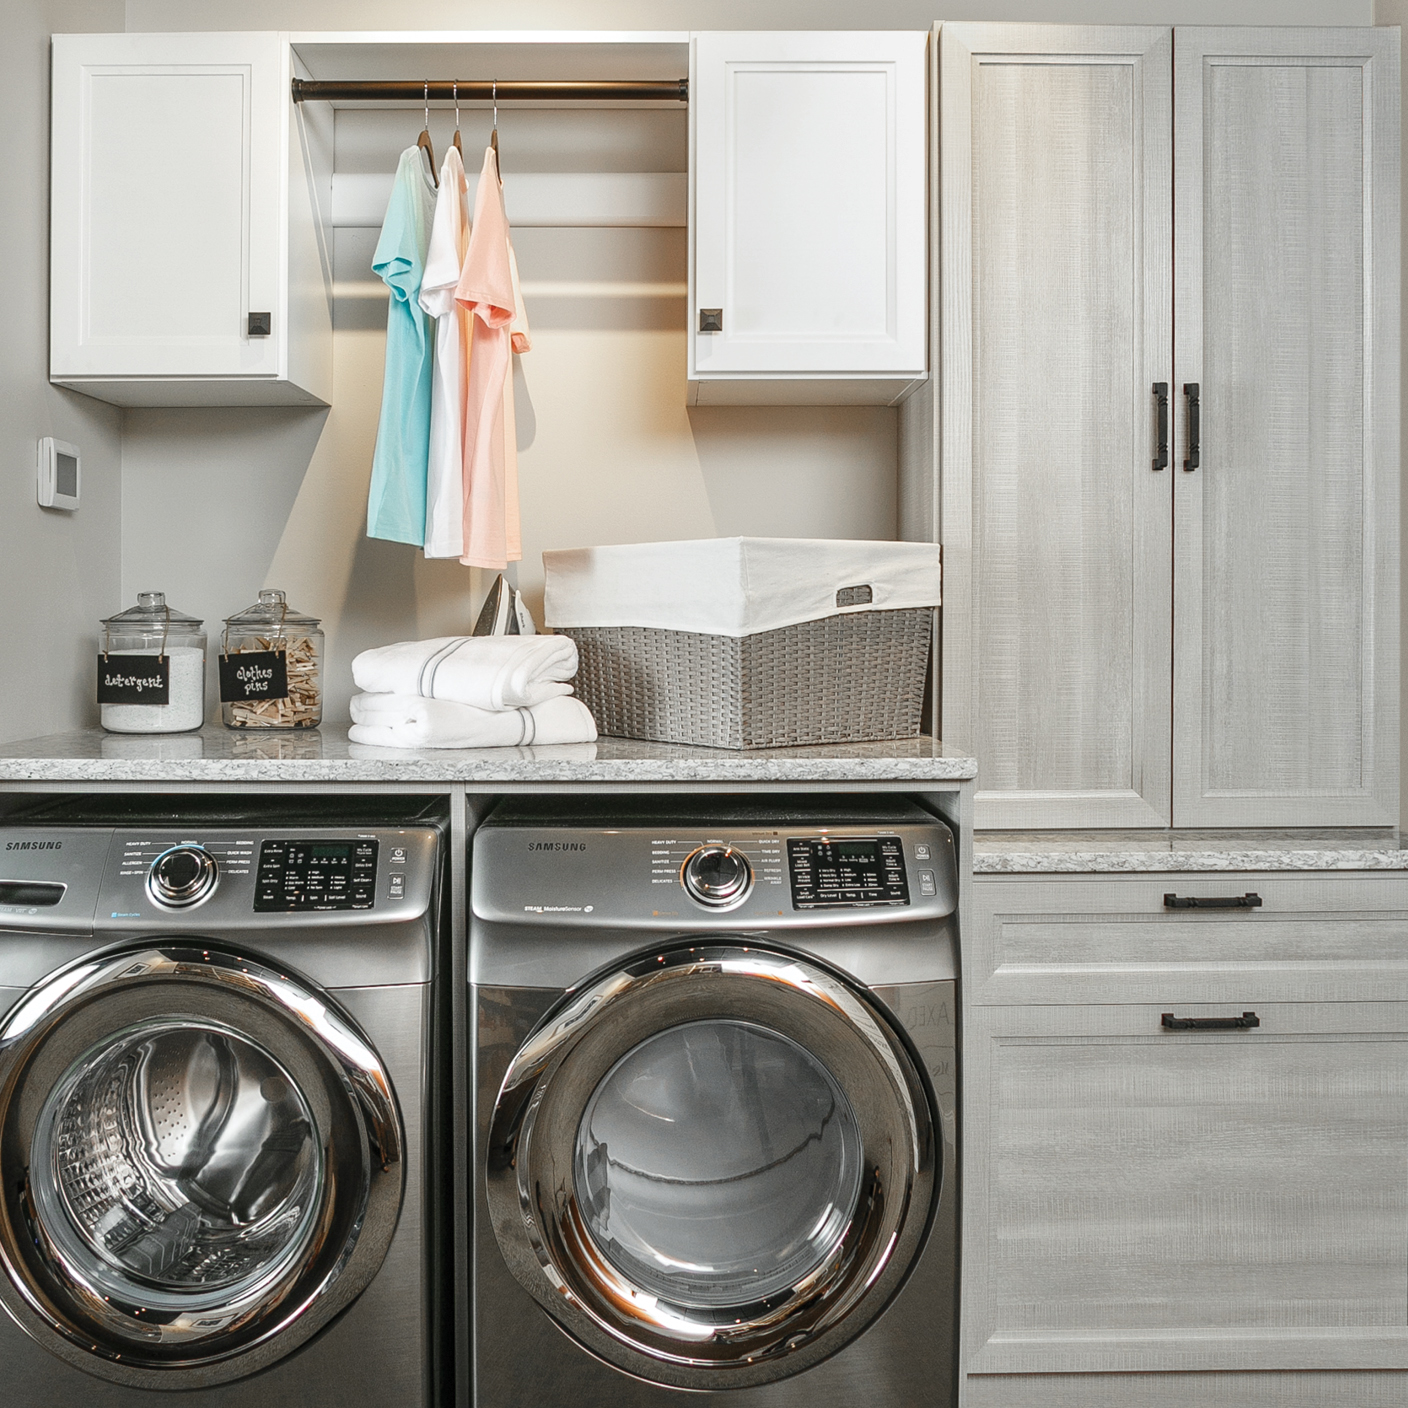 Laundry room storage solutions with hanging rod from Inspired closets